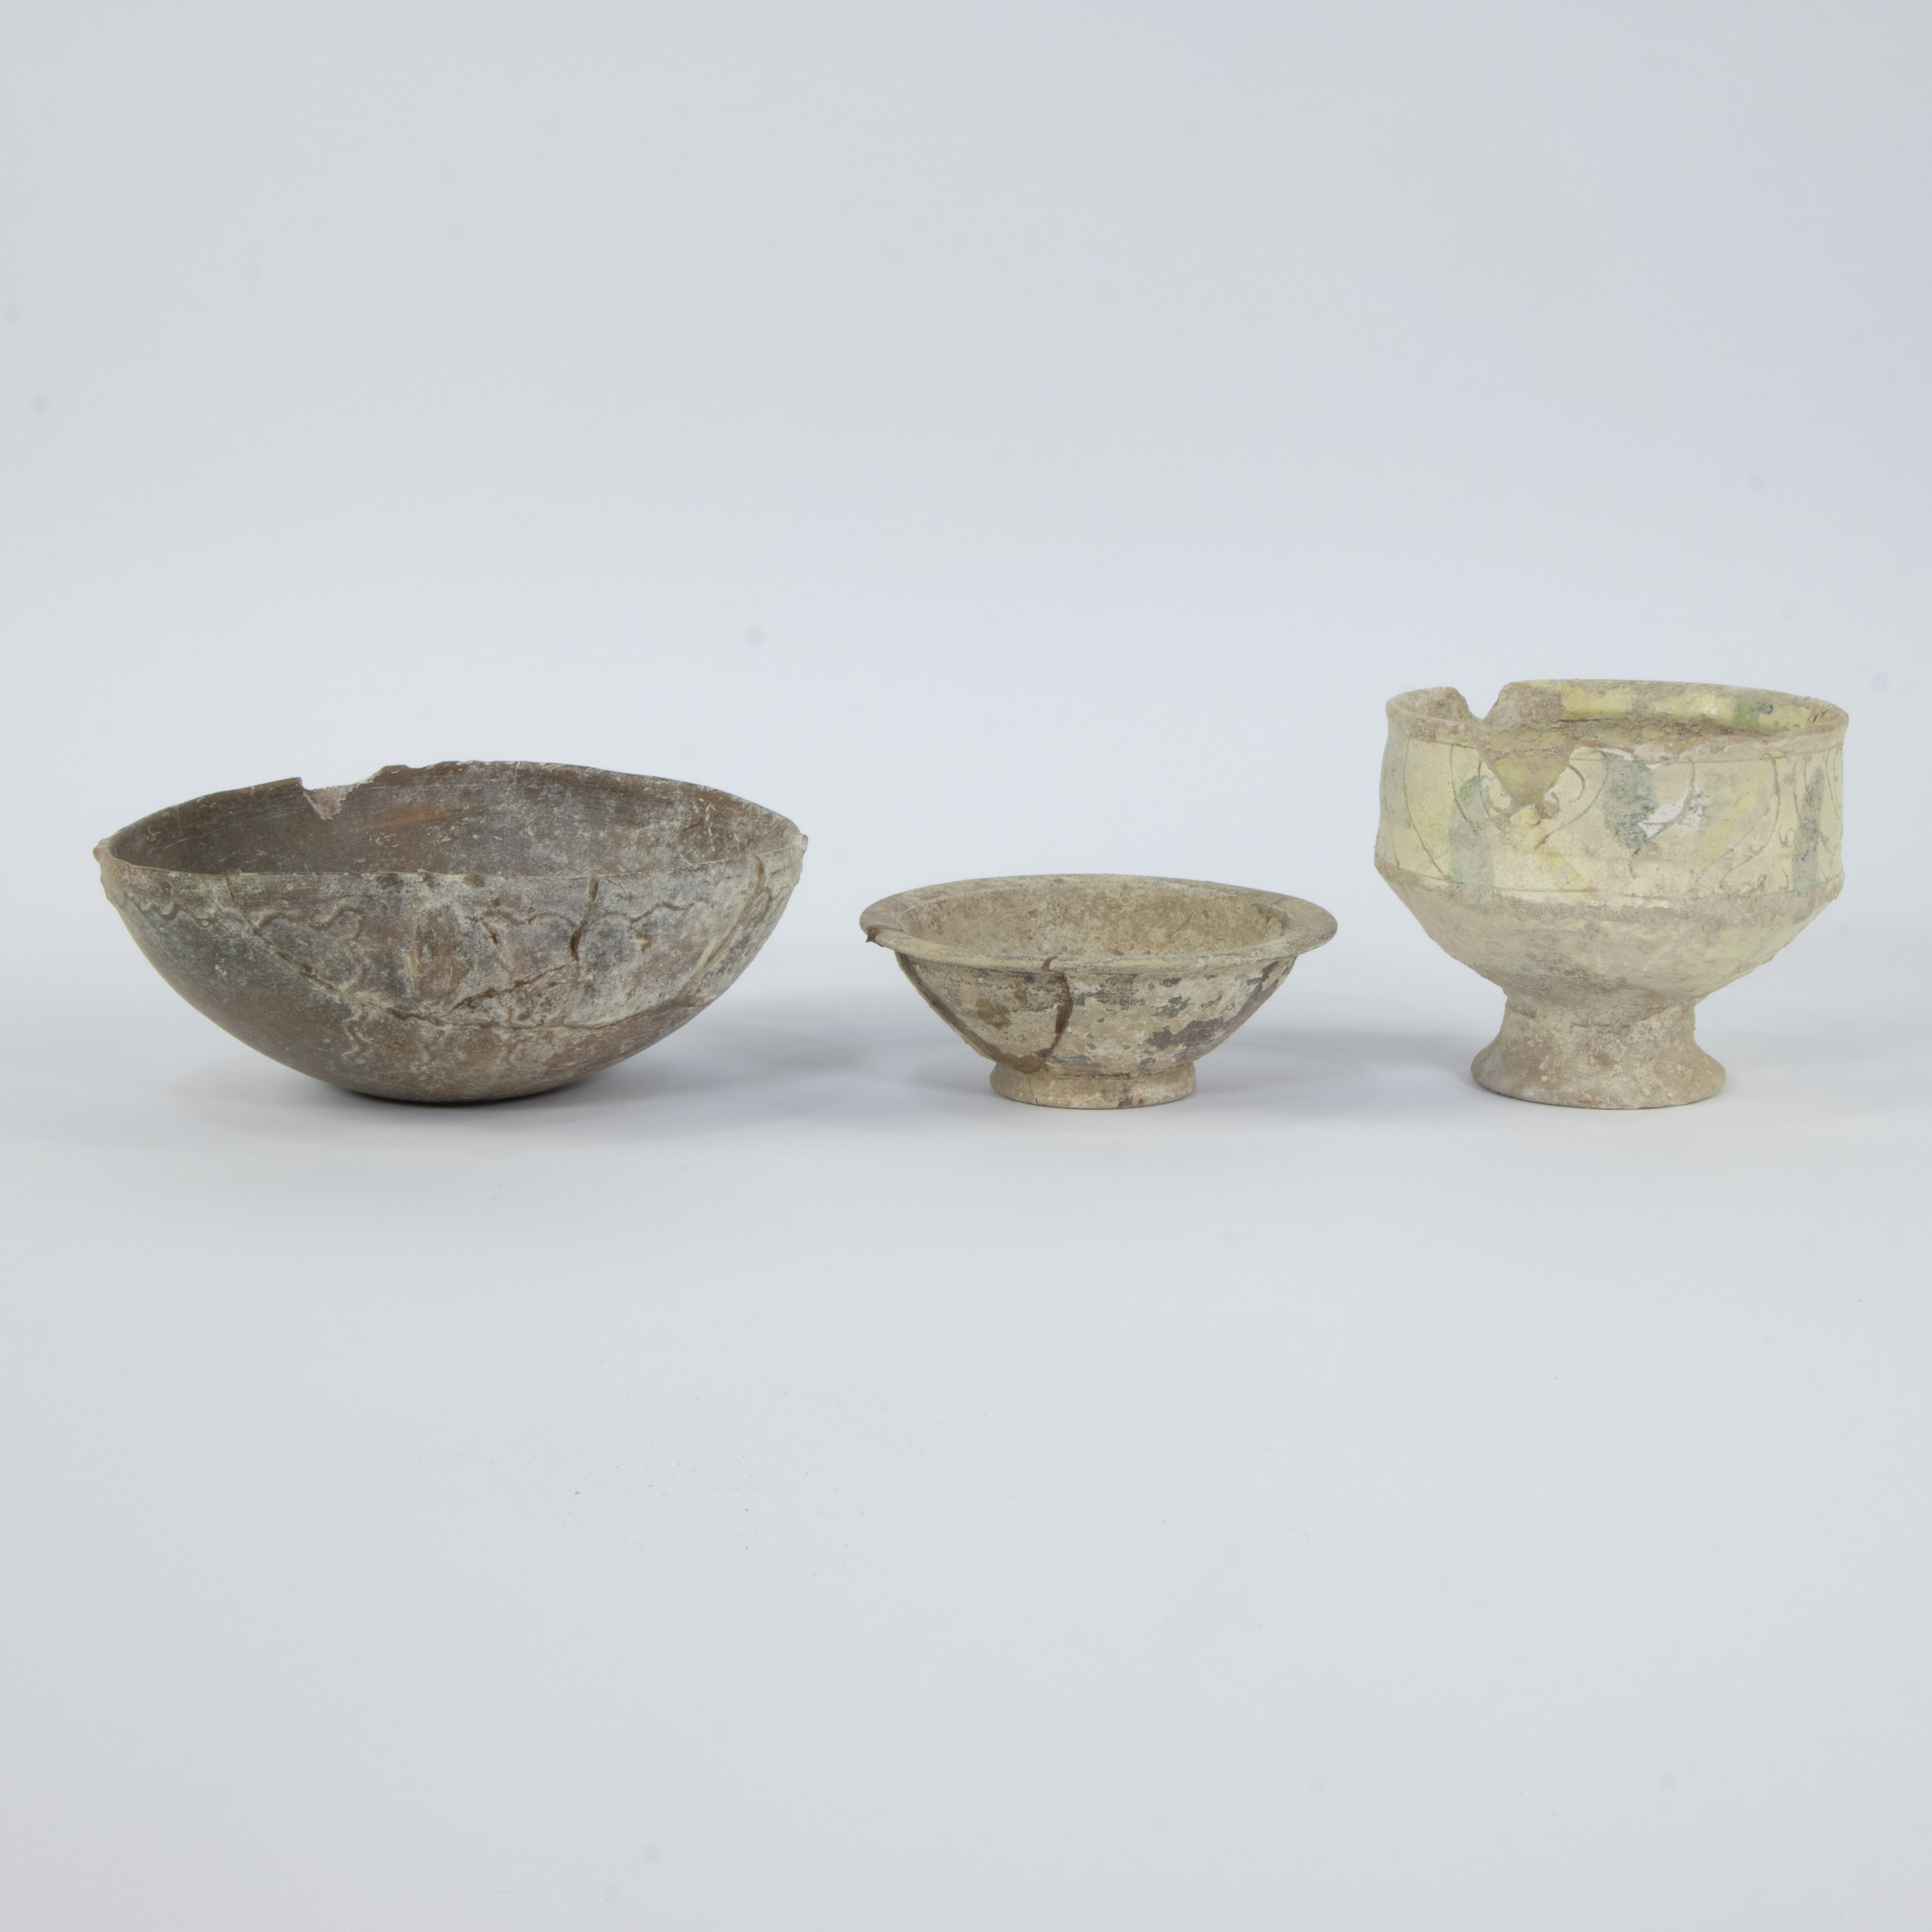 Pottery from ancient Greece, 2 bowls and a drinking cup - Image 4 of 5